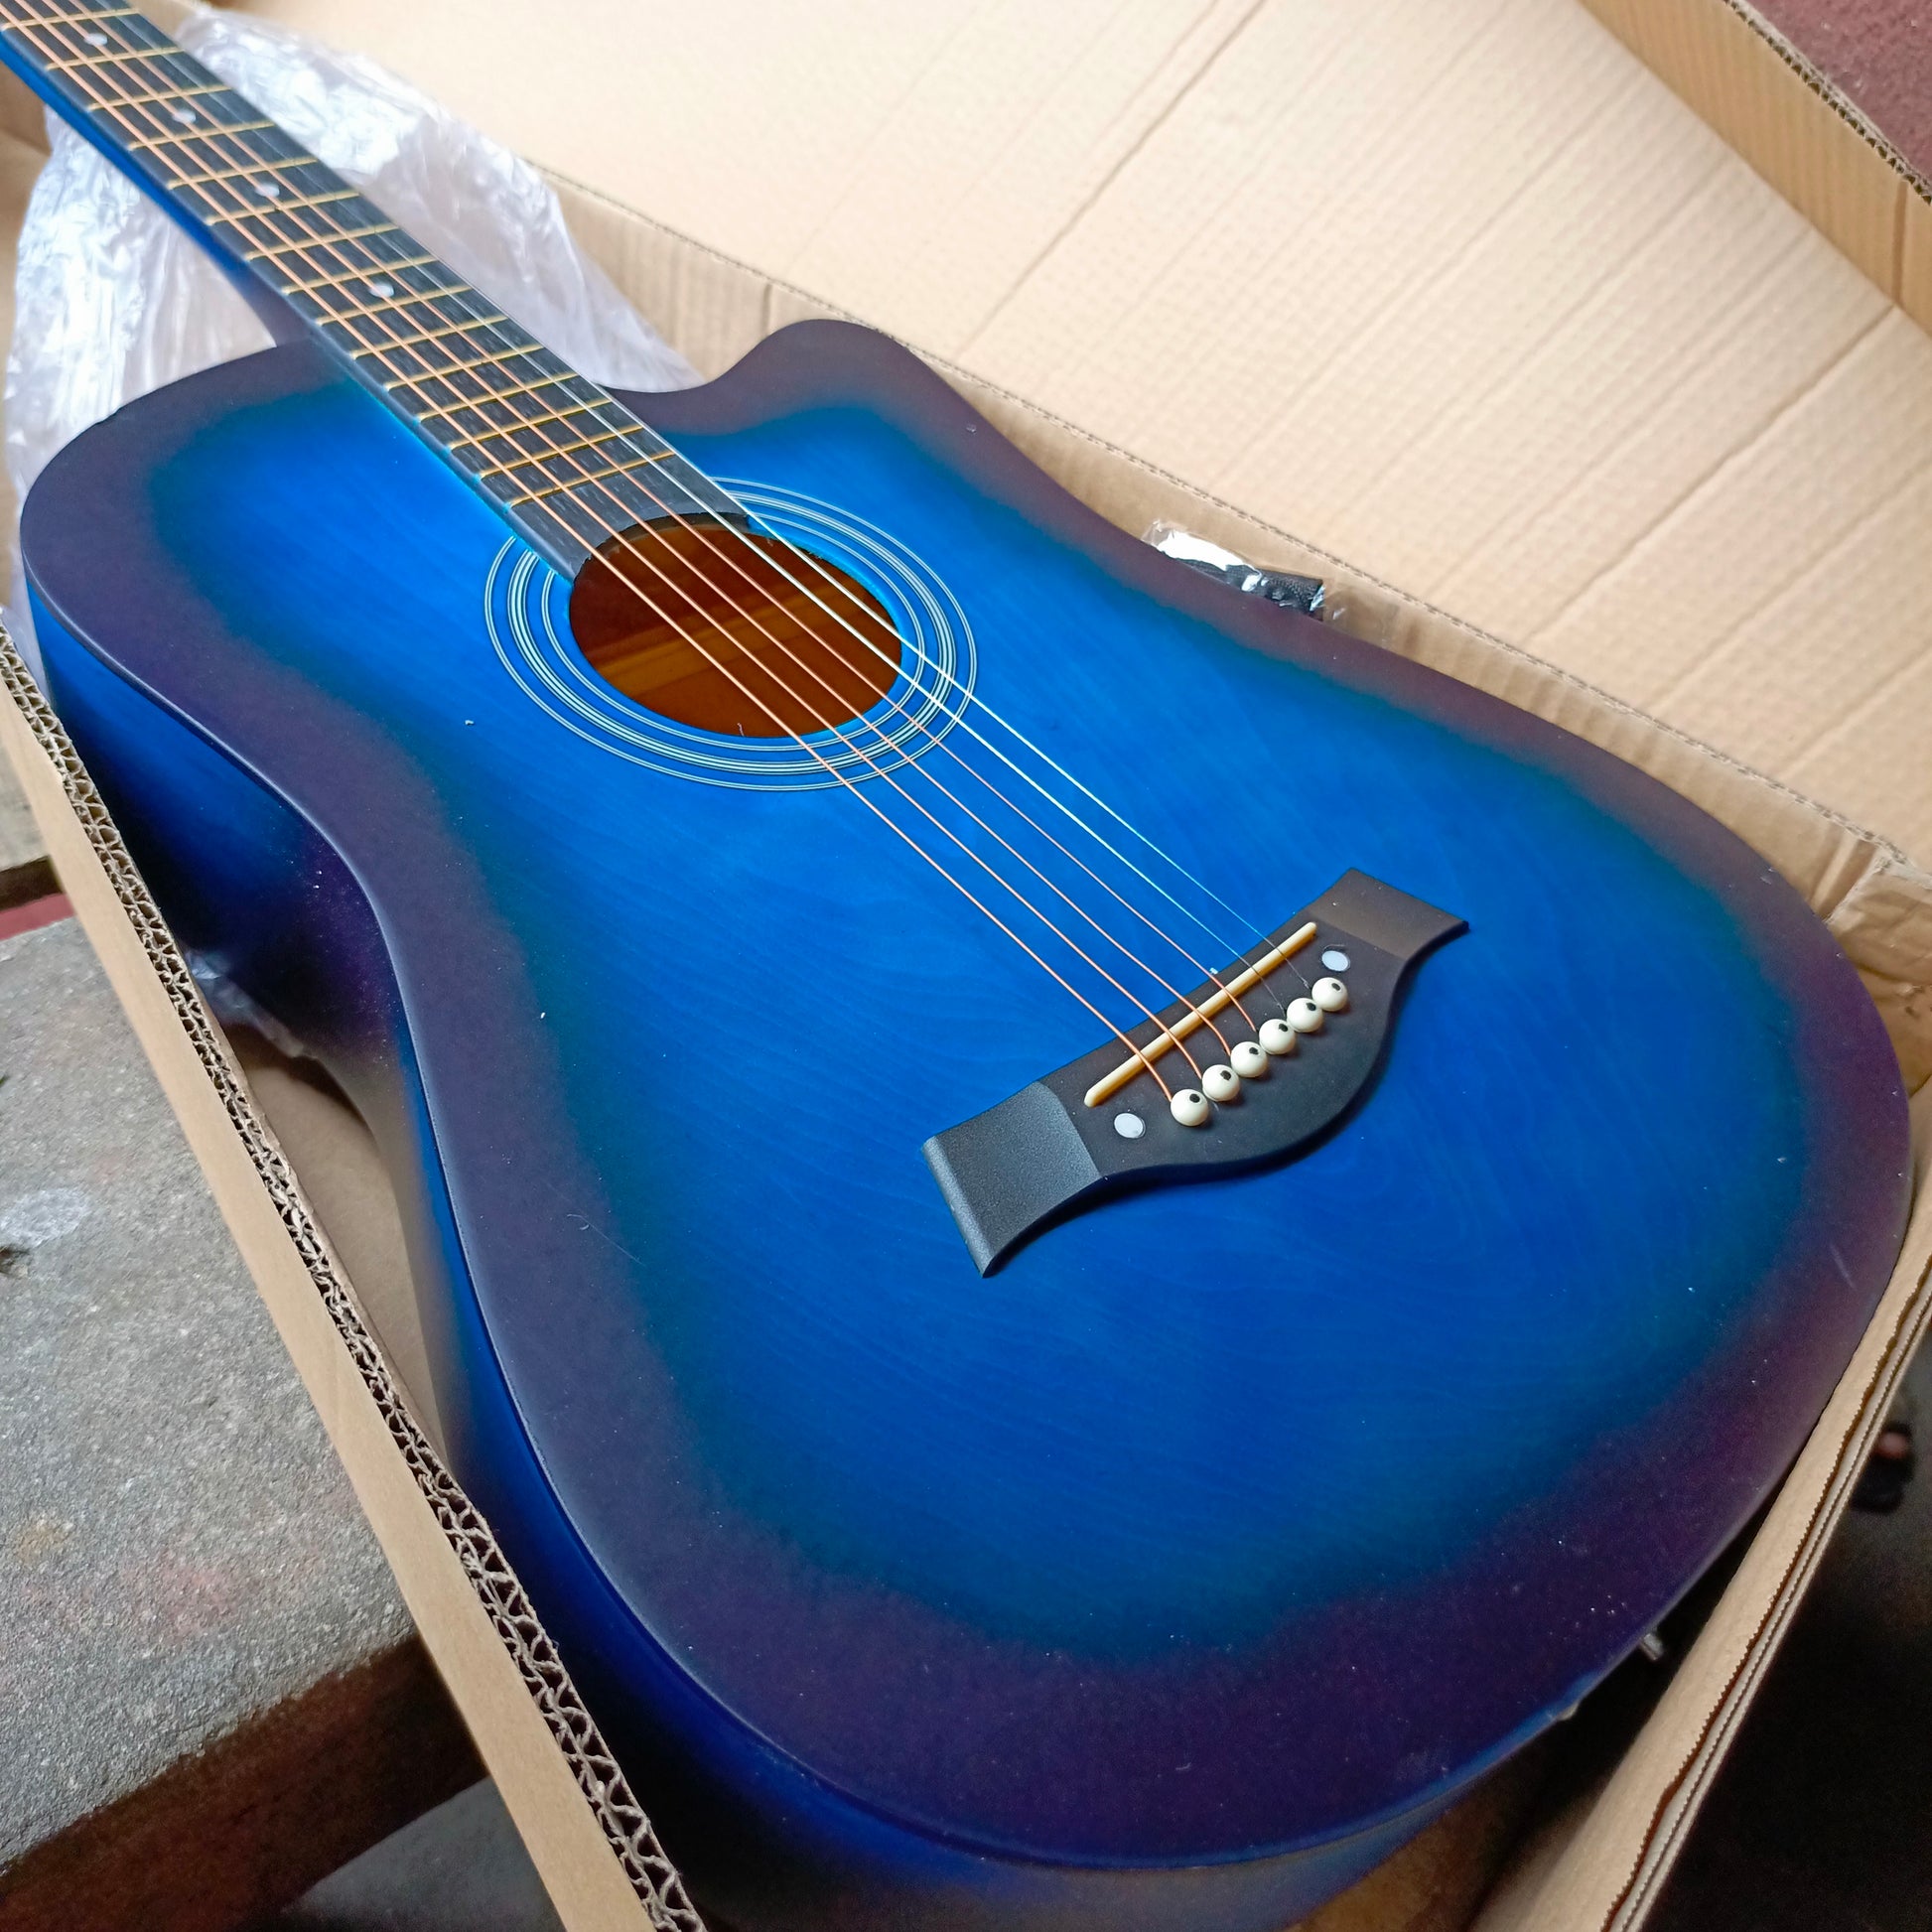 Classic 38" Blue Single-cut Acoustic Guitar with Belt and Bag - Brand New